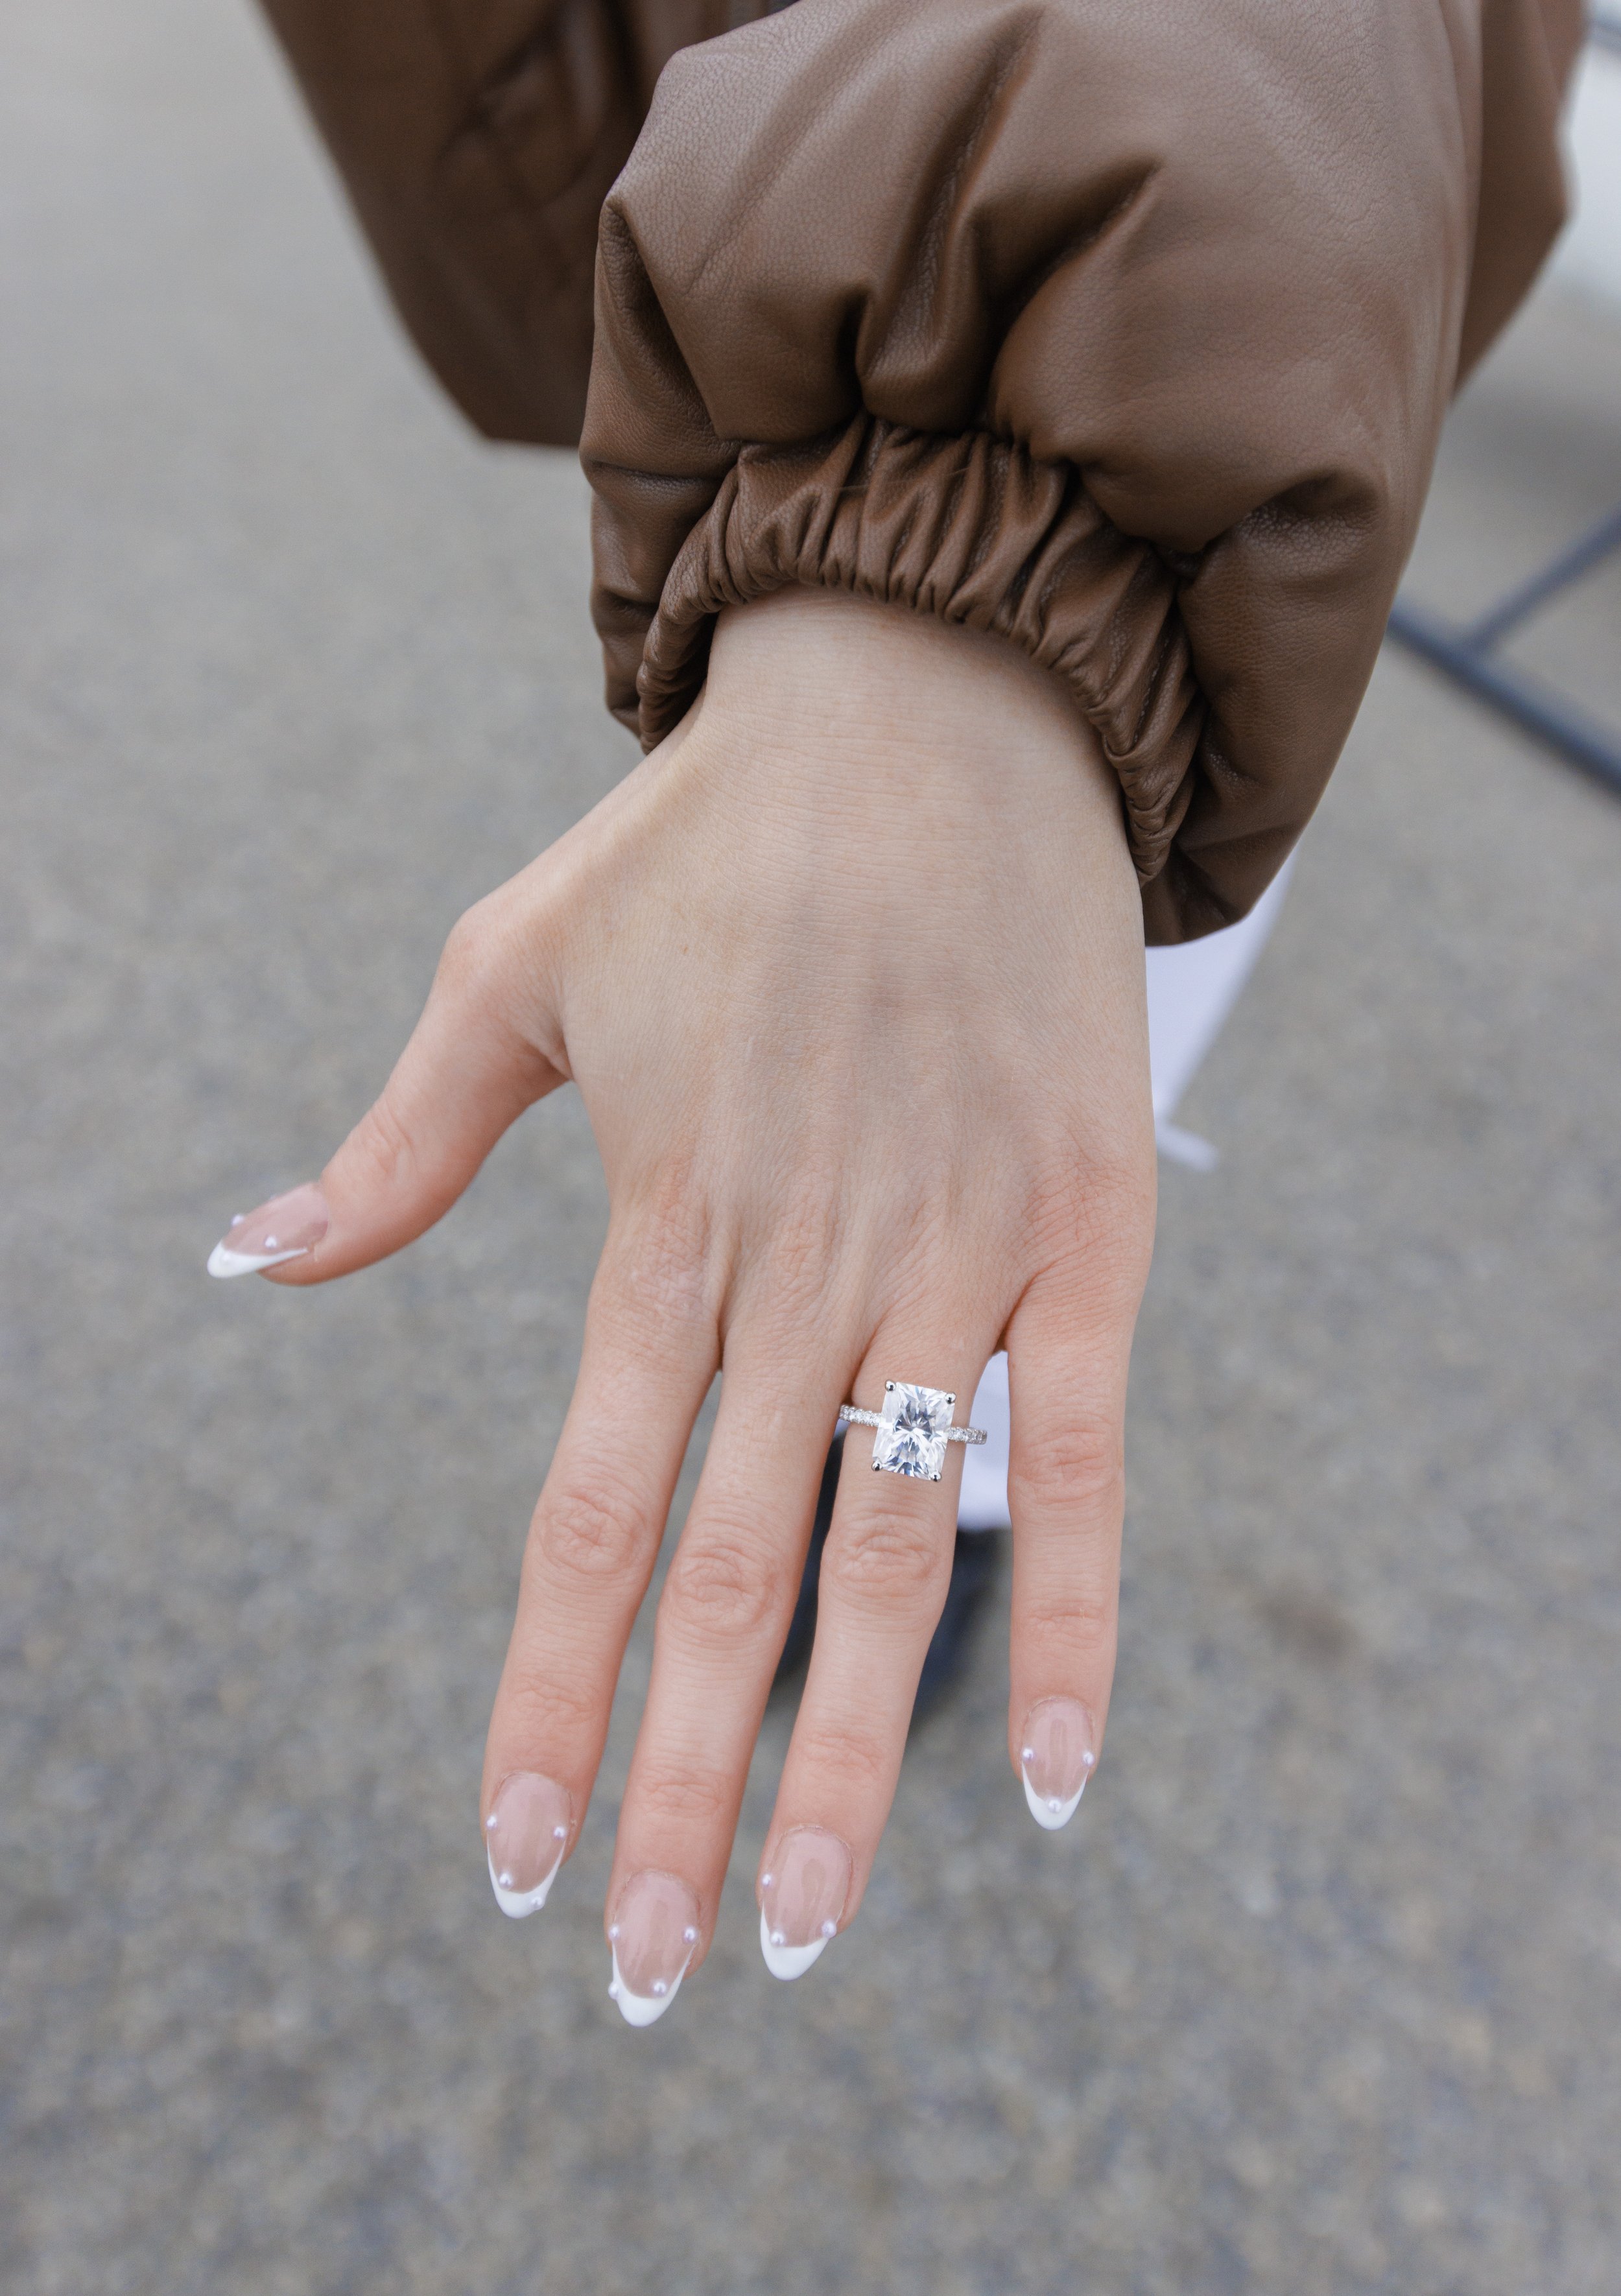  A portrait of the engagement ring on the woman's finger featuring a rectangle diamond by Savanna Richardson Photography. wedding ring simple classic ring #SavannaRichardsonPhotography #SavannaRichardsonEngagements #utahproposals #helicopterproposal 